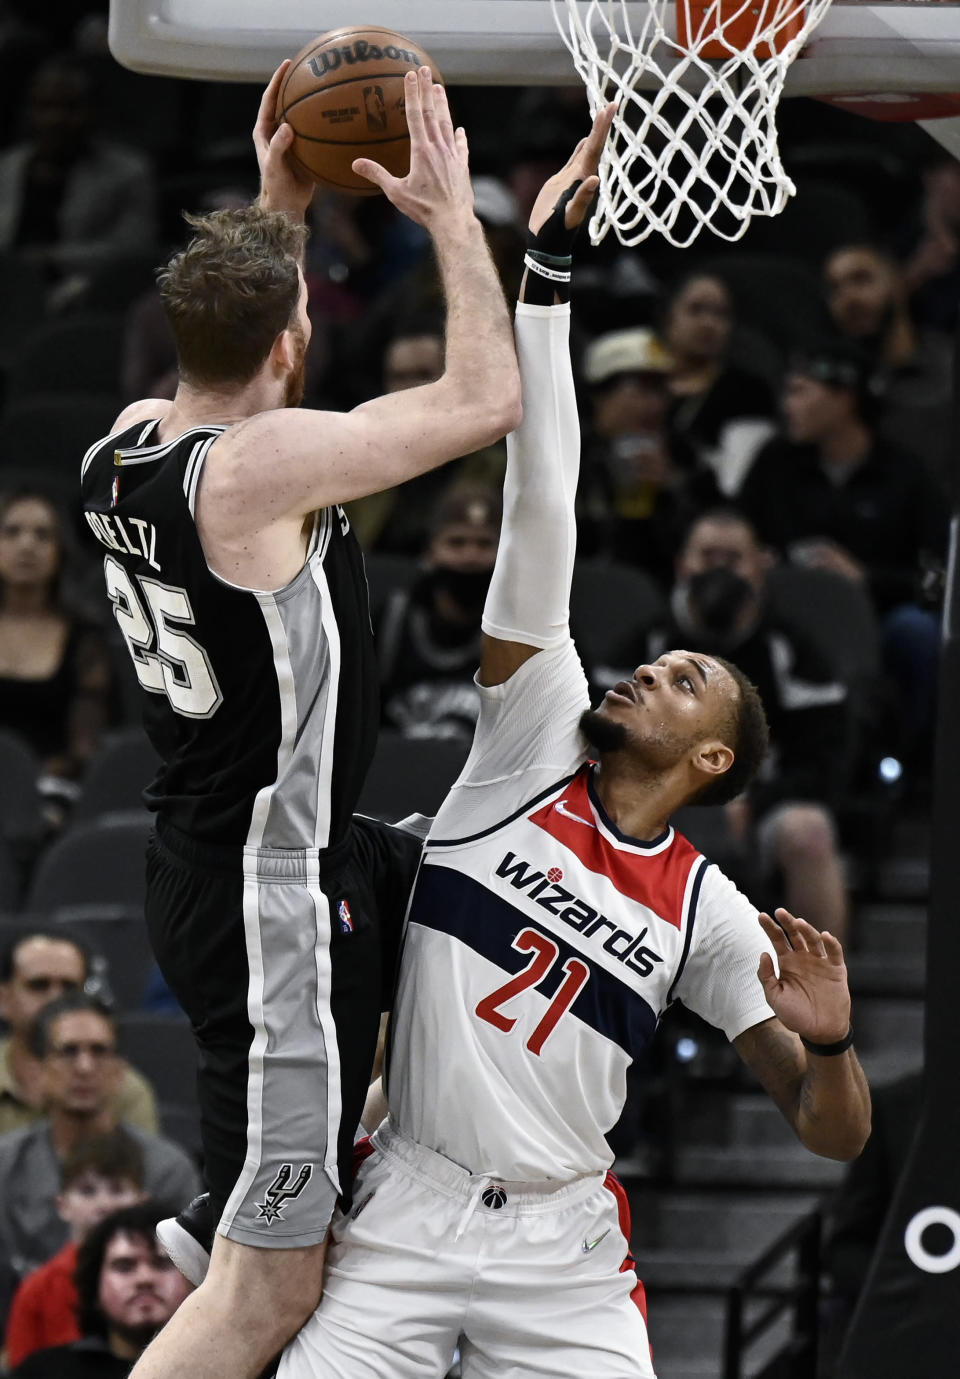 Washington Wizards' Daniel Gafford (21) attempts to block a shot by San Antonio Spurs' Jakob Poeltl during the first half of an NBA basketball game, Monday, Nov. 29, 2021, in San Antonio. (AP Photo/Darren Abate)